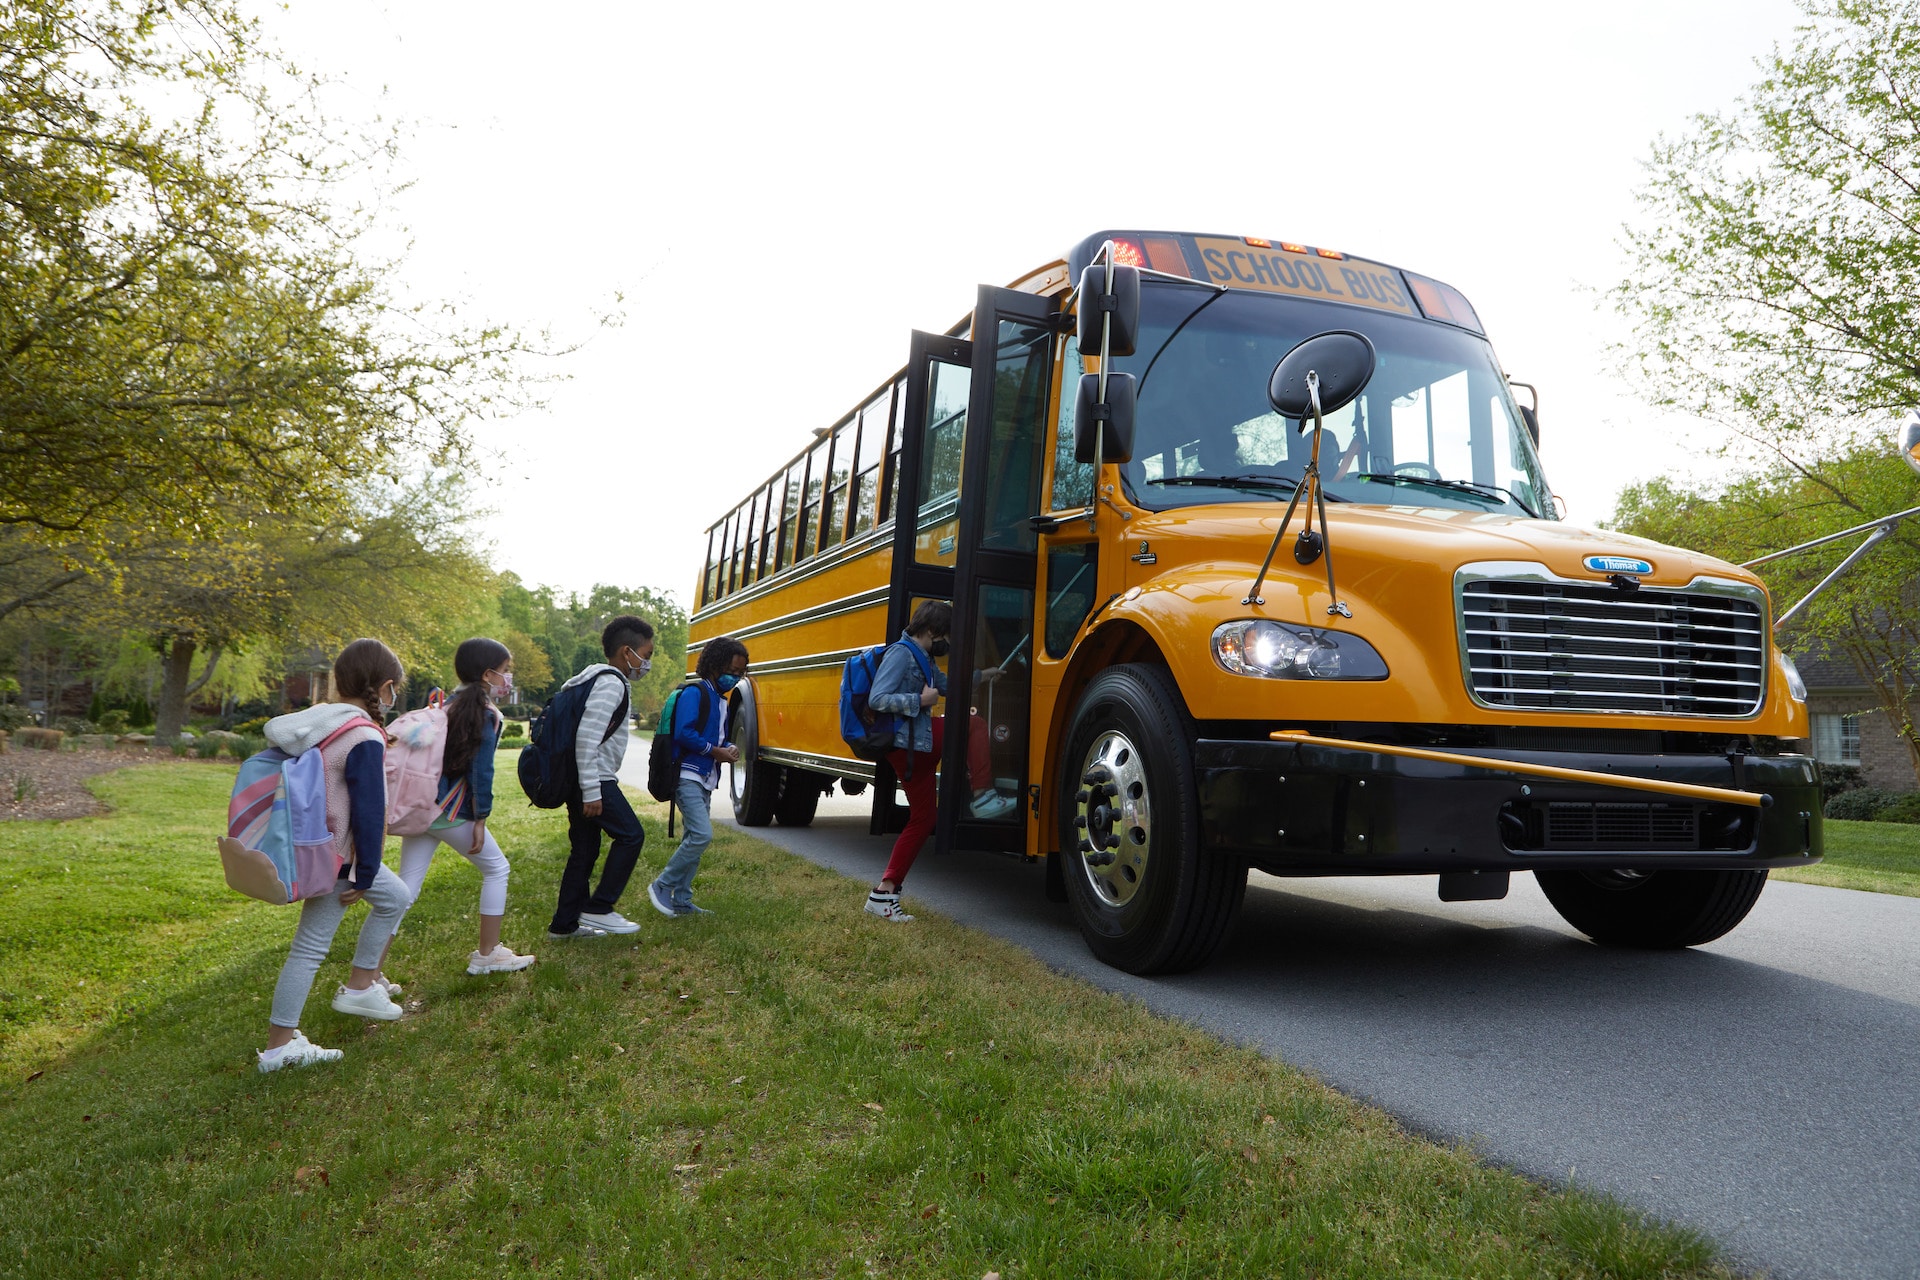 Thomas Built Buses Celebrates 200th Proterra Powered Electric School Bus Delivery